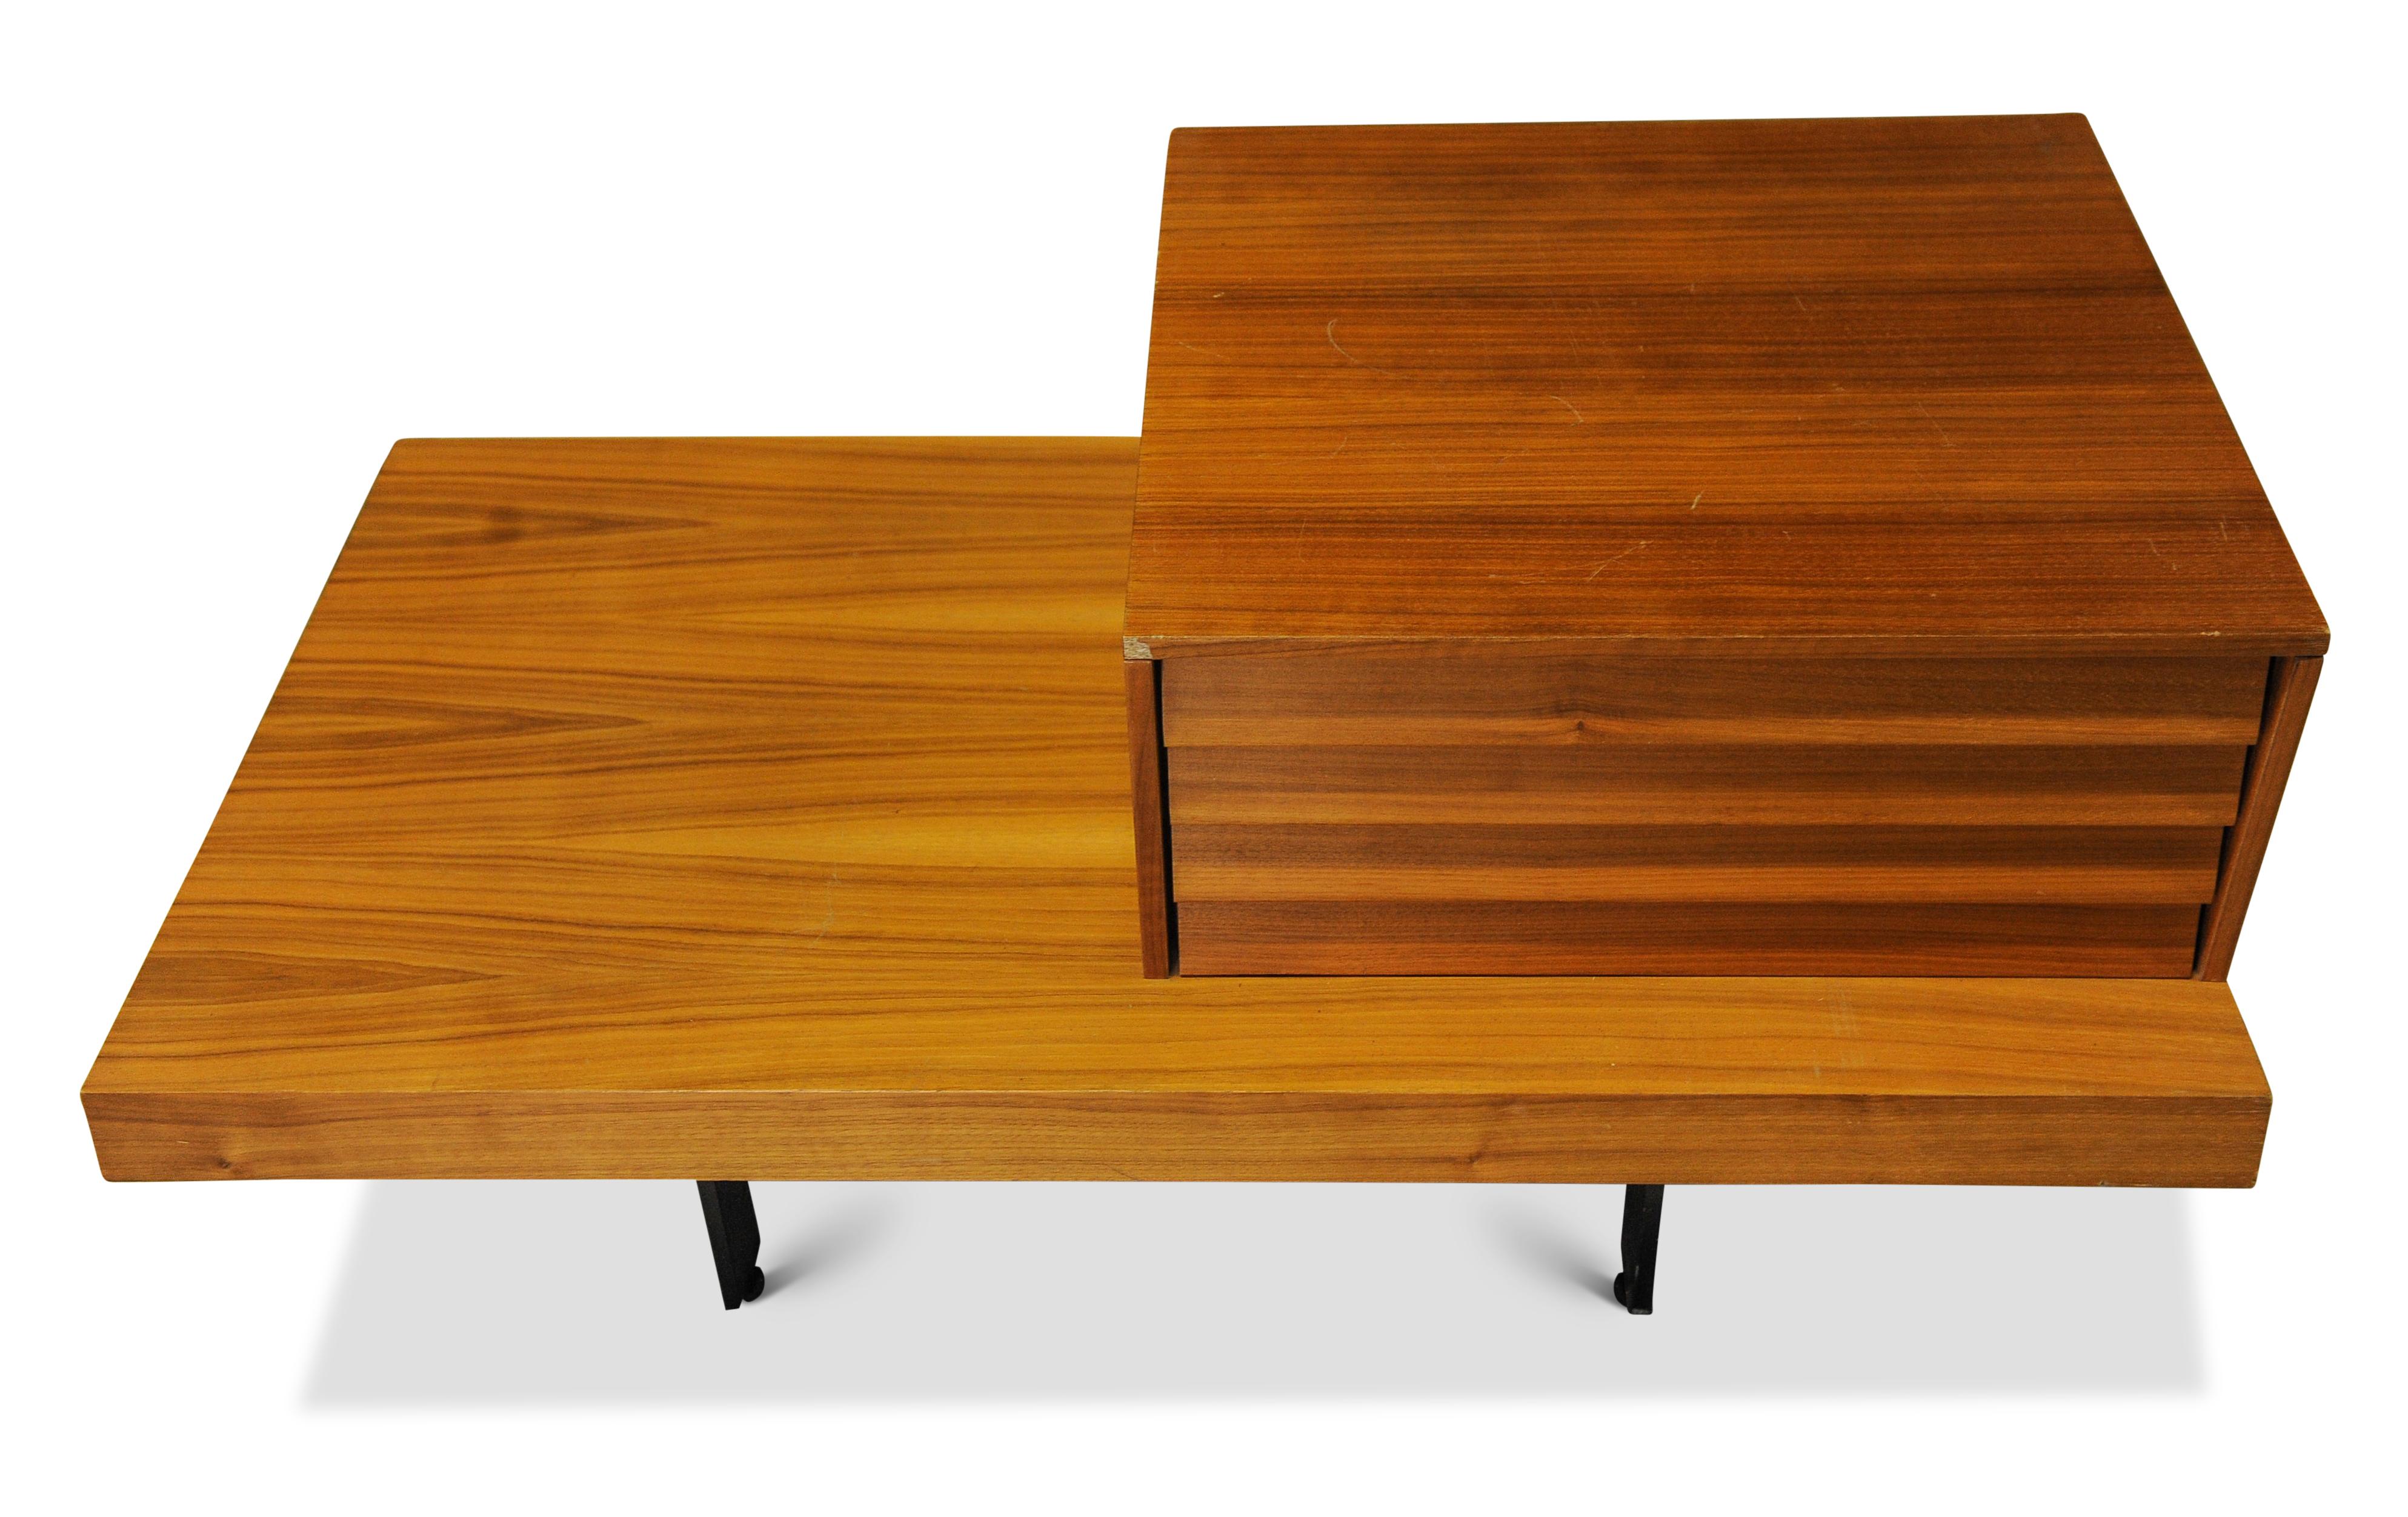 Veneer Teak Side Tables With Louvre Effect Drawers Upon Metal Bases by Punt Mobles  For Sale